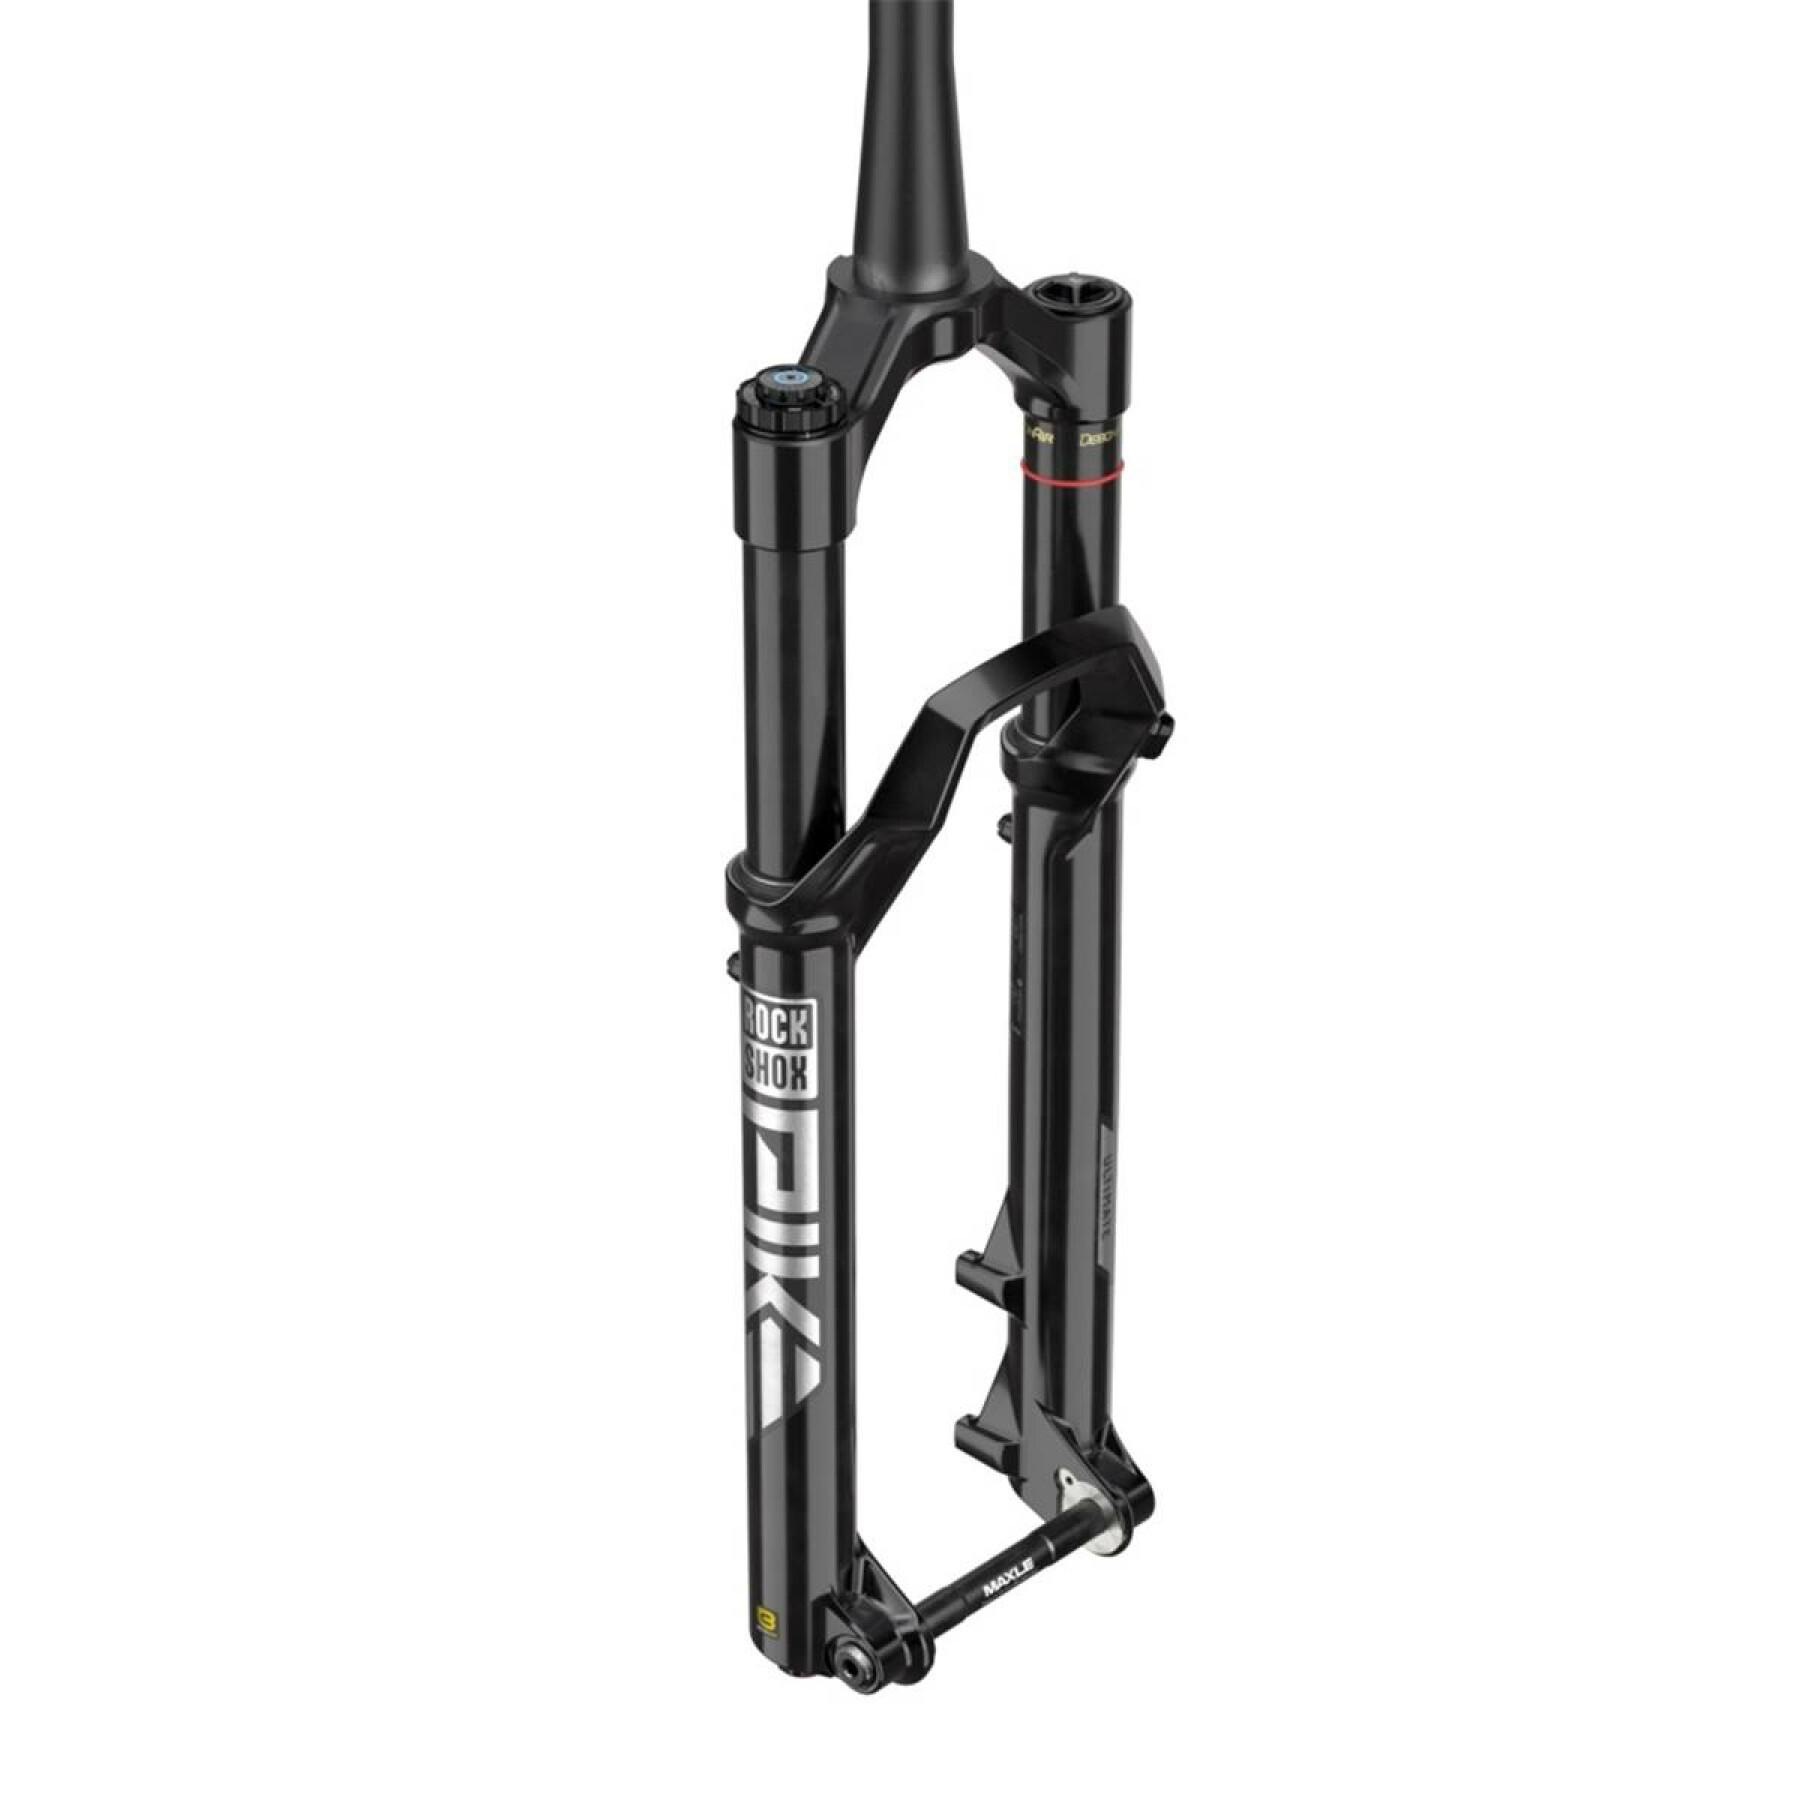 Gaffel Rockshox PIKE Ultimate Charger 3 RC2 29 130mm OS44 C1